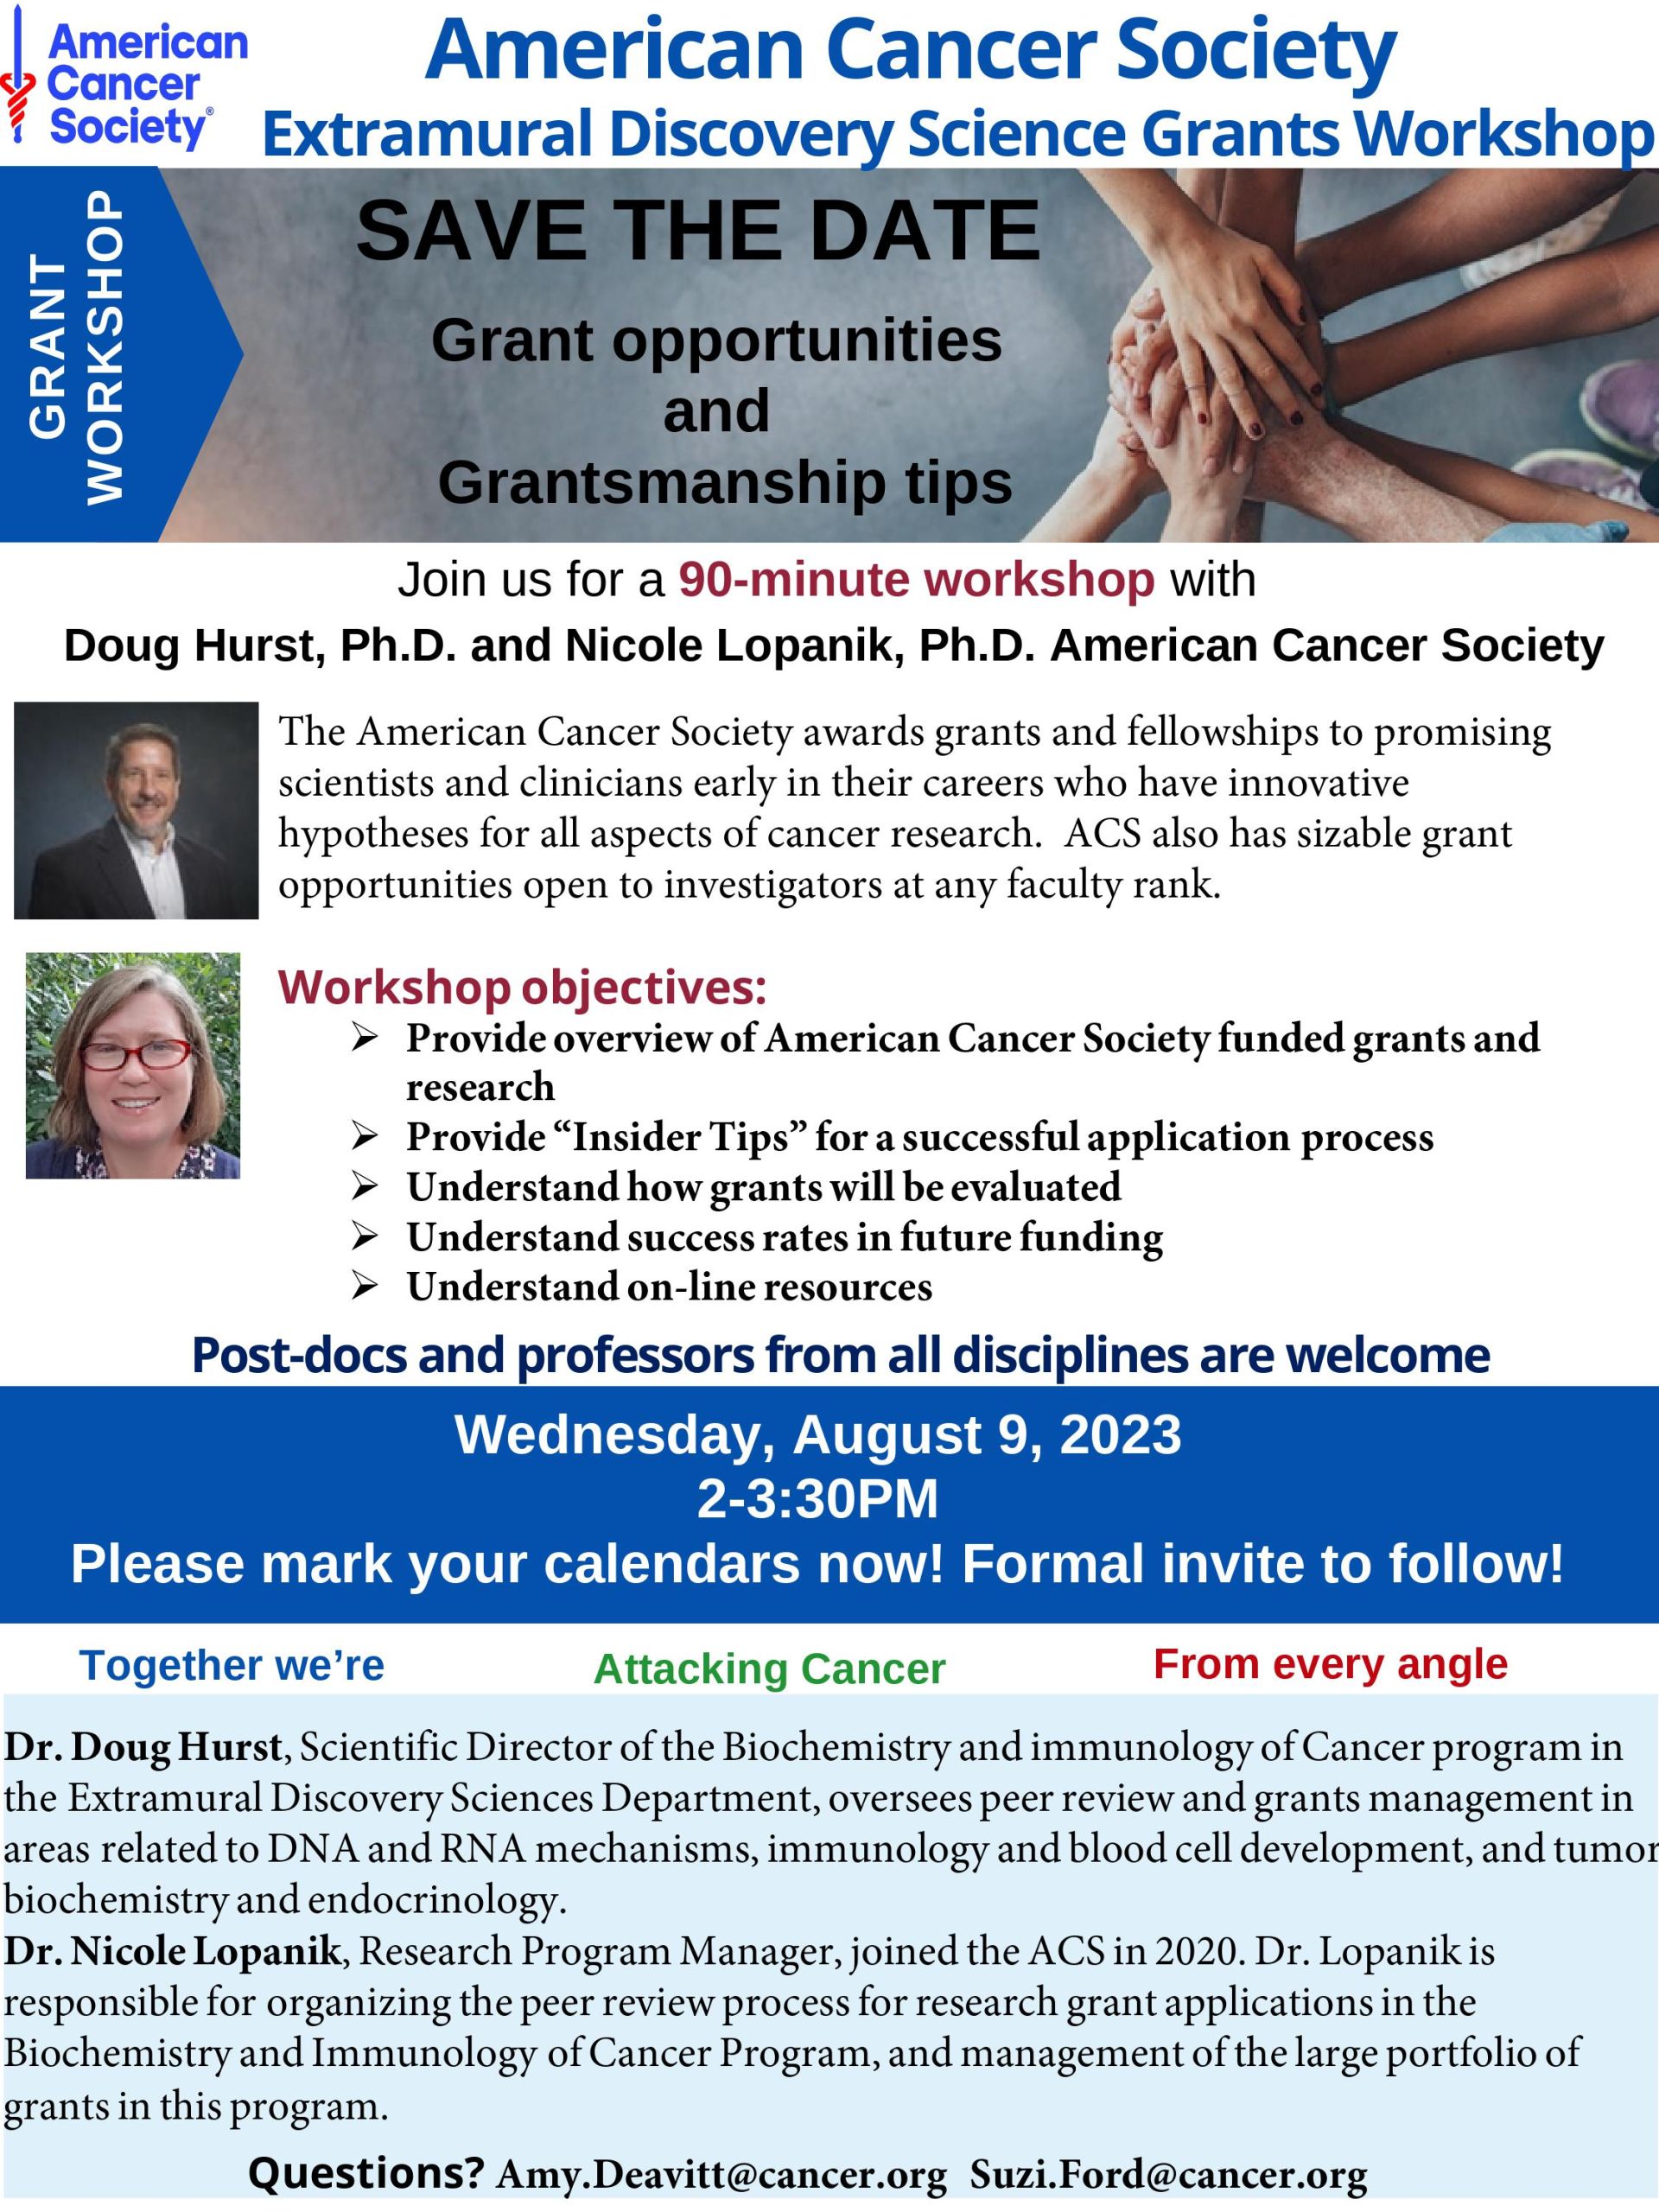 Save the Date for the American Cancer Society writing workshop